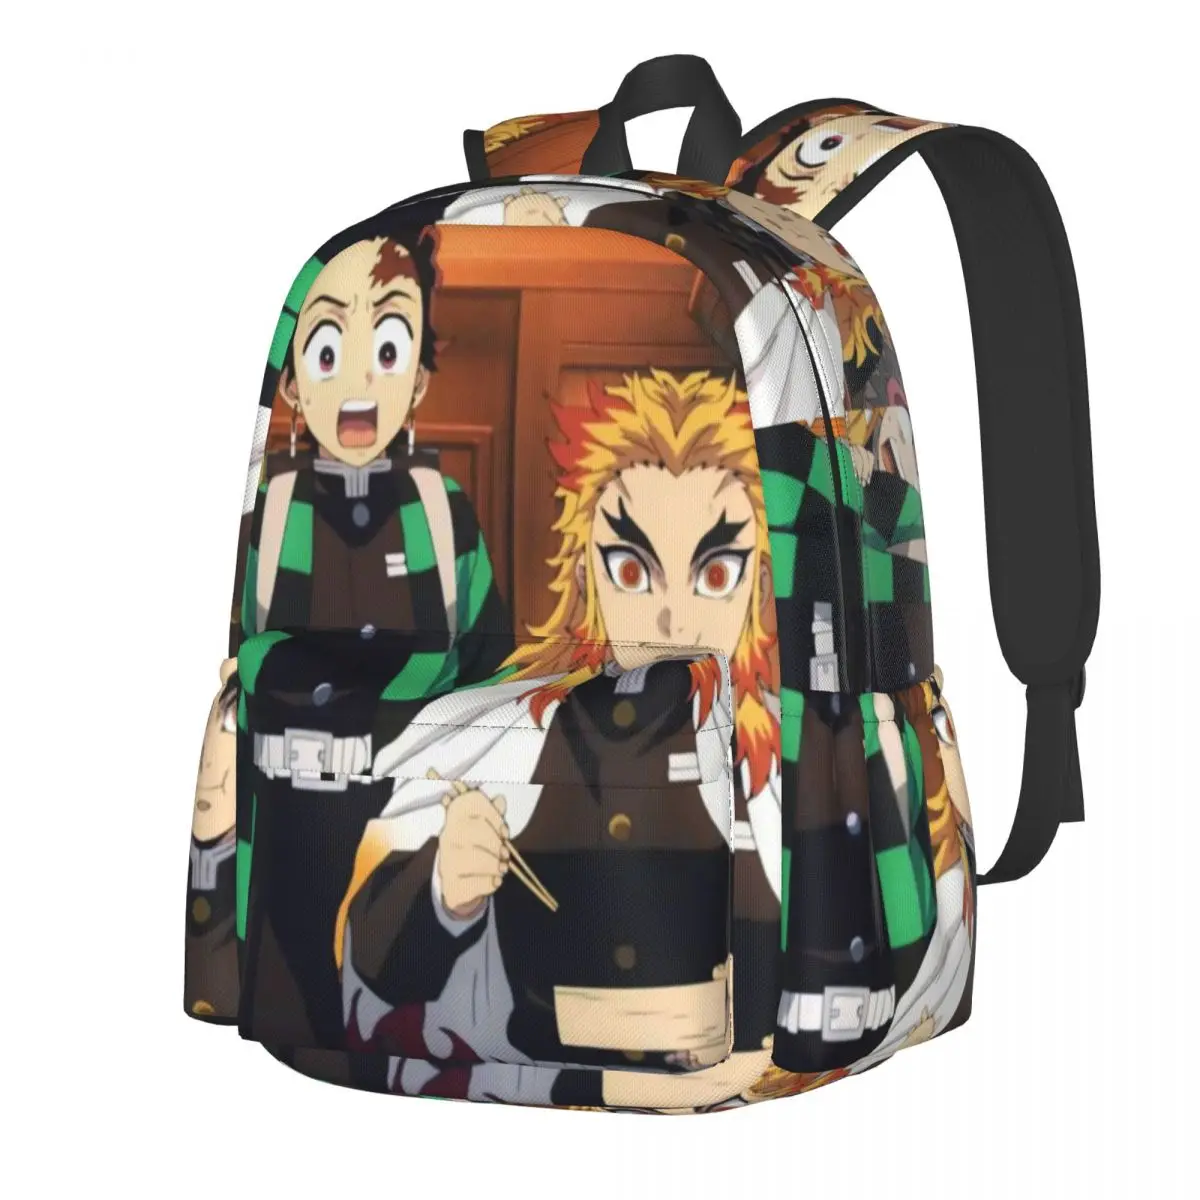 

Demon Slayer Backpack Rengoku and His Friends Cool Backpacks Student Unisex Outdoor Style High School Bags Colorful Rucksack